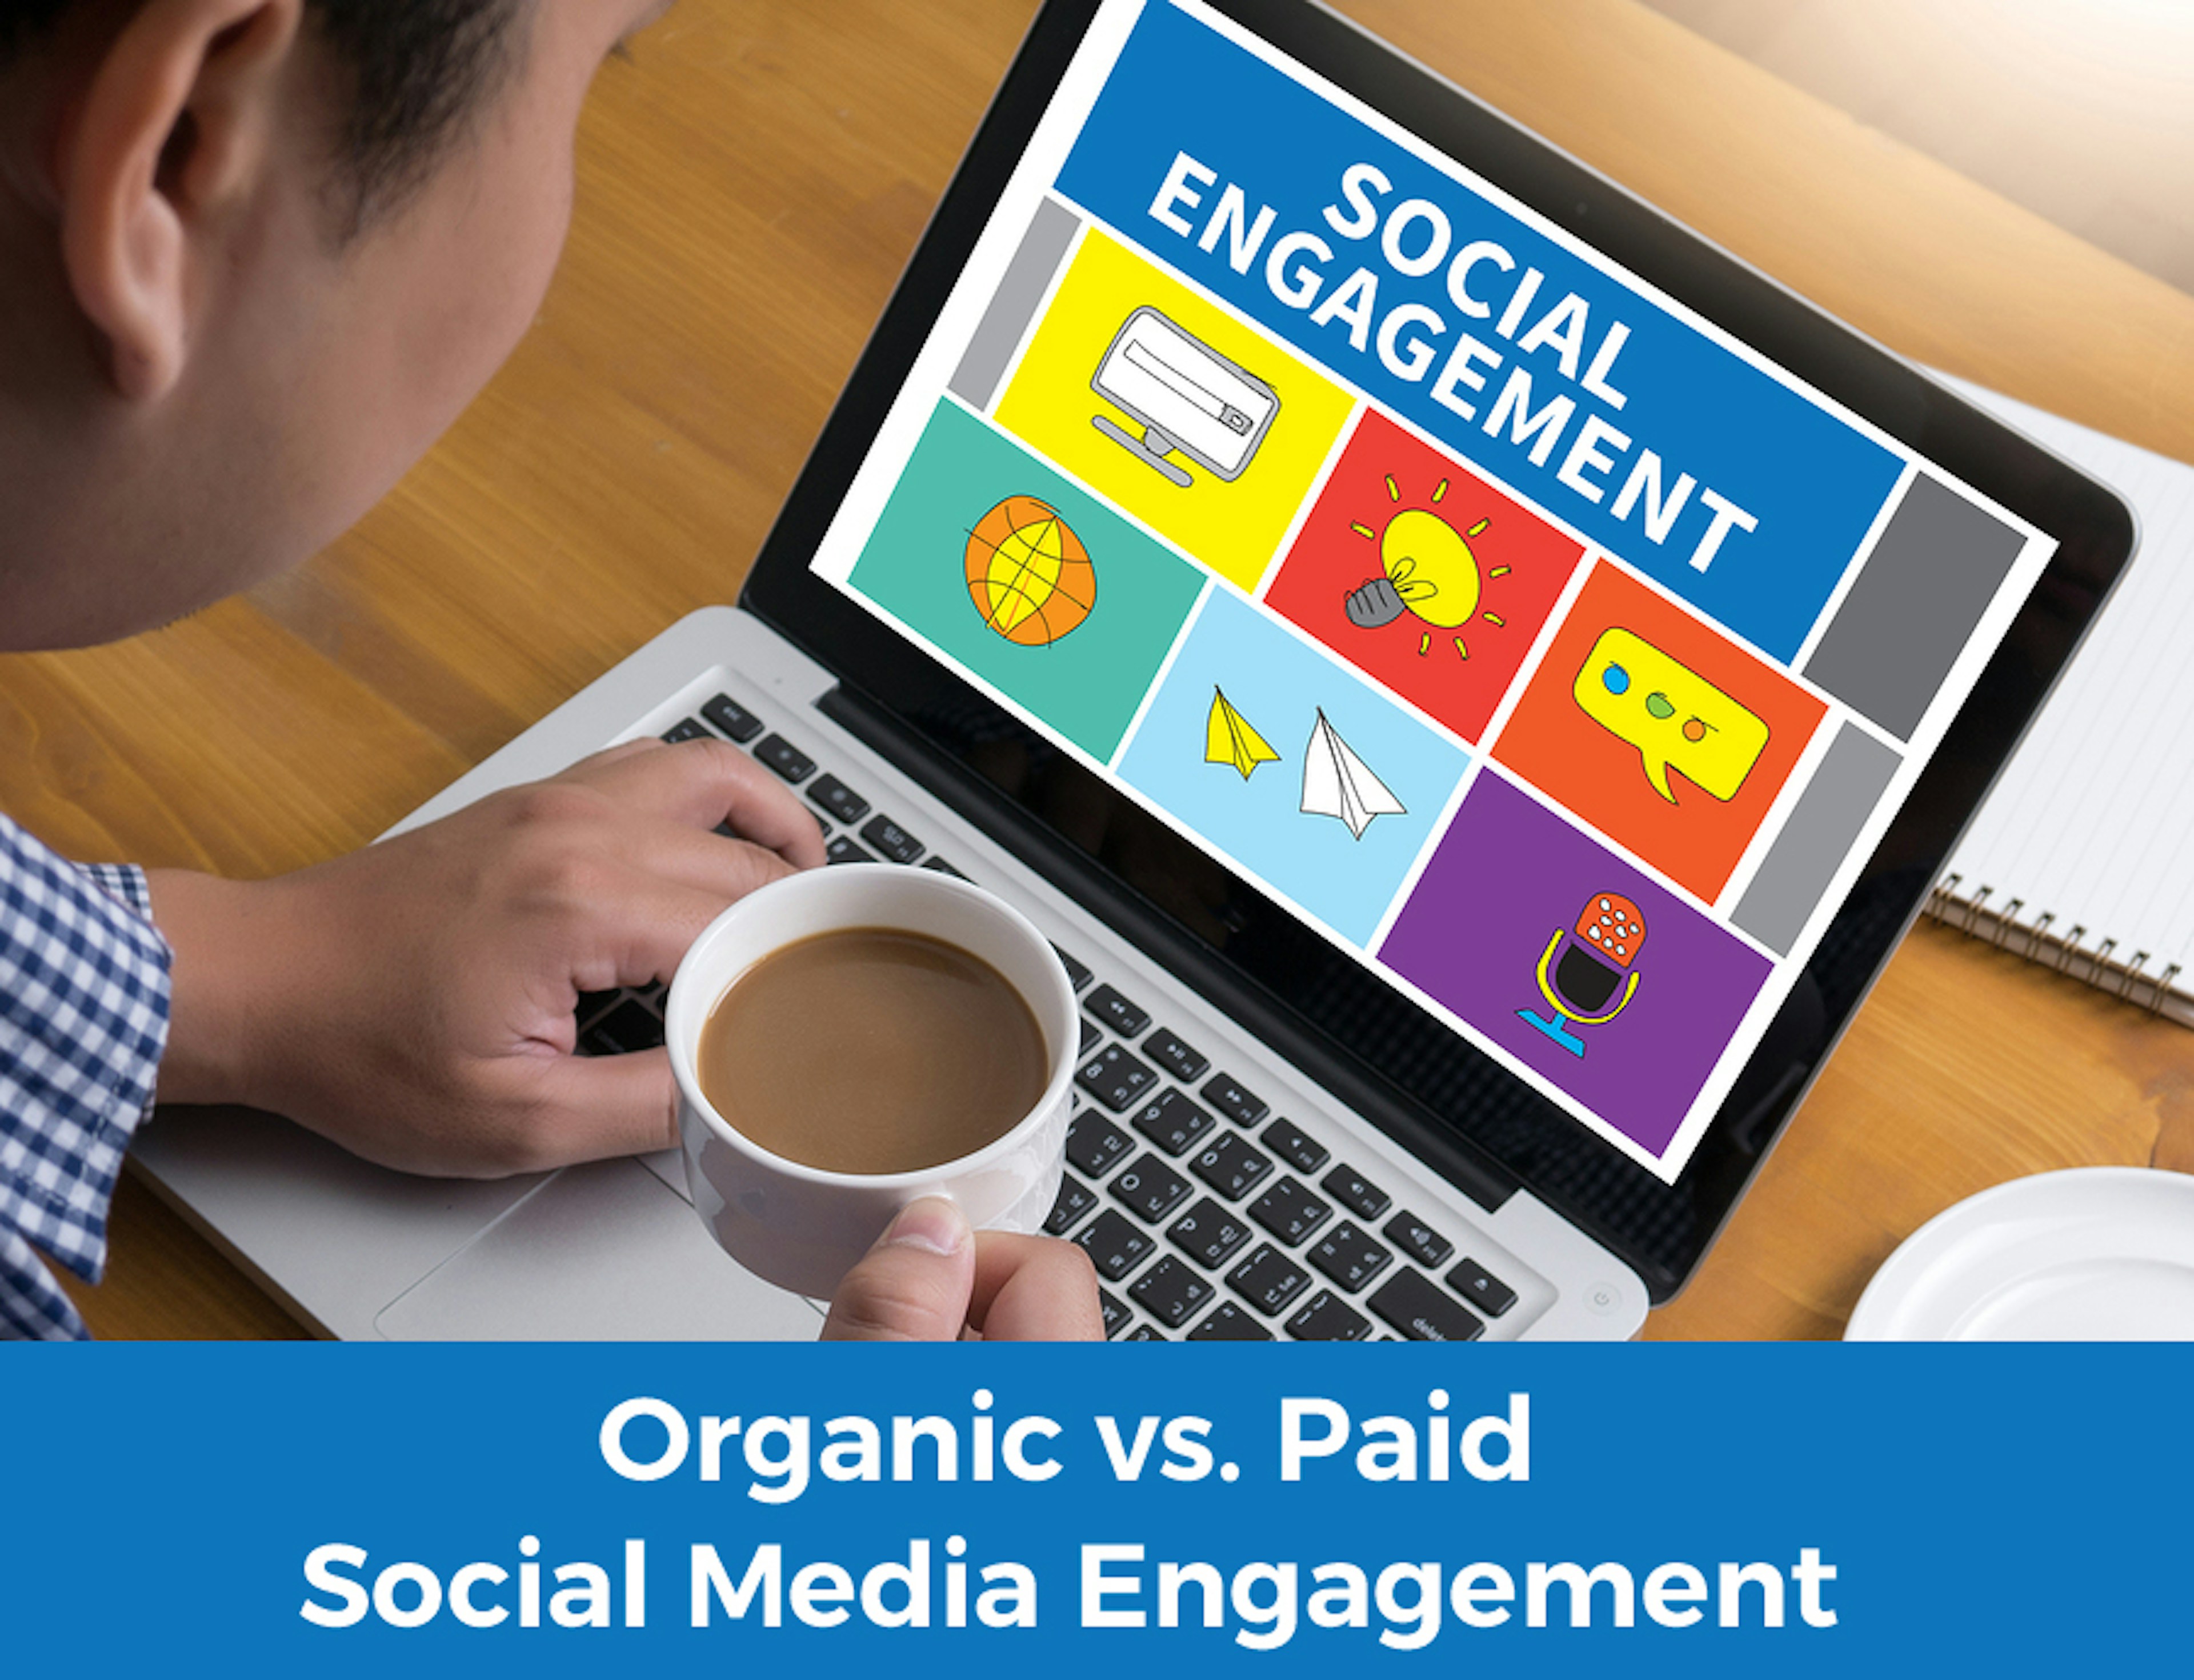 Two Examples of Social Media Marketing Campaigns and How to Use Them